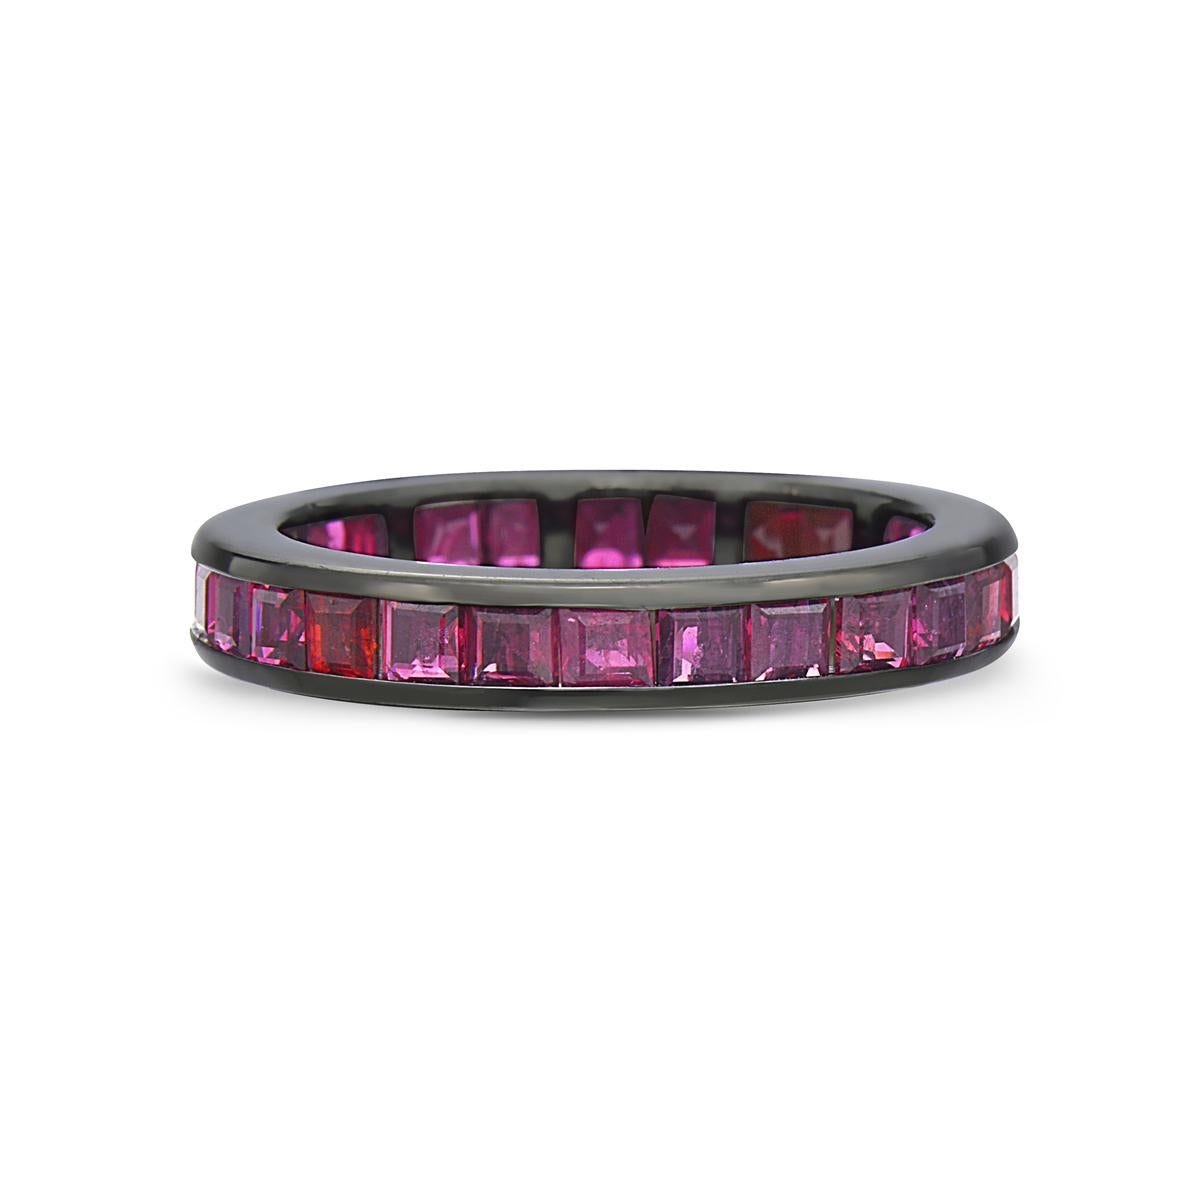 This slim eternity band ring features 28 square cut baguette rubies weighing 2.55 carats set in 14K gold dipped in rhodium. 6.1 grams total weight. Size 6.